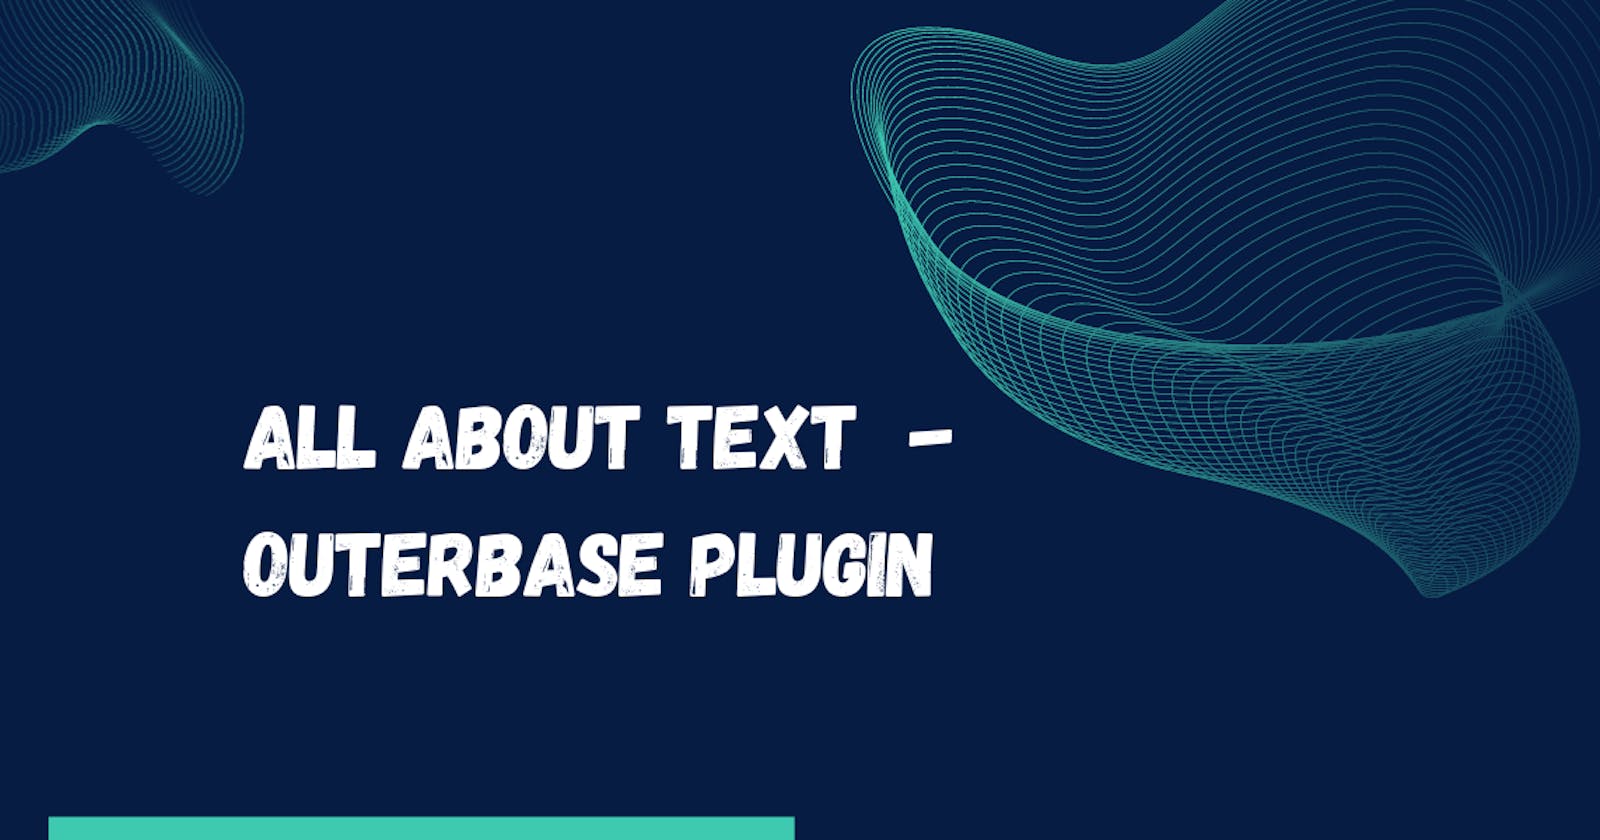 All About Text (AAT) : Outerbase Plugin for Efficiently analyzing, summarizing, and translating text